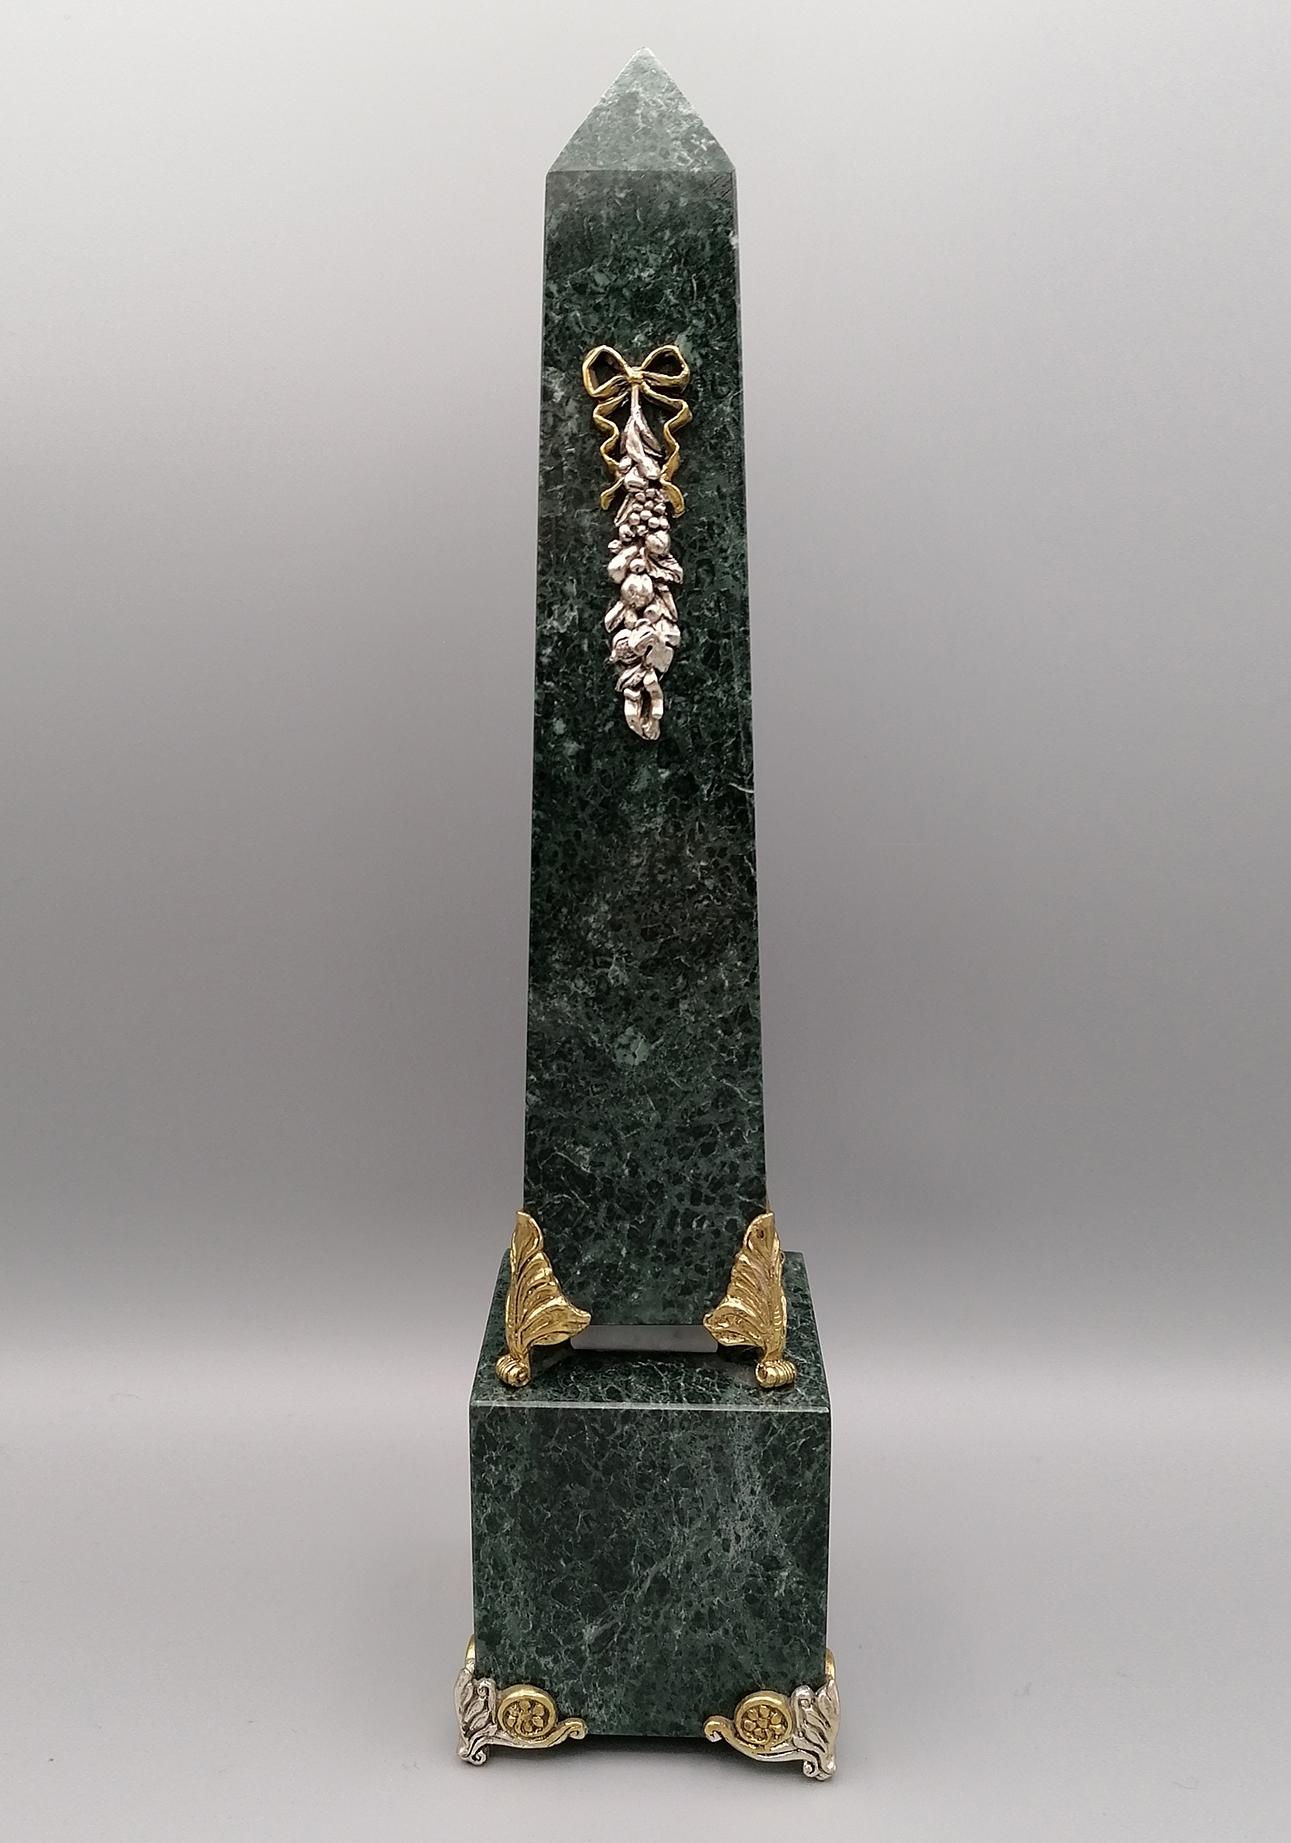 Green marble obelisk with sterling silver friezes.
The frieze on the obelisk depicts a composition of fruit with a love knot and is placed on a base, again in green marble, on 4 feet in two-tone, natural and gilded solid sterling silver.
The base